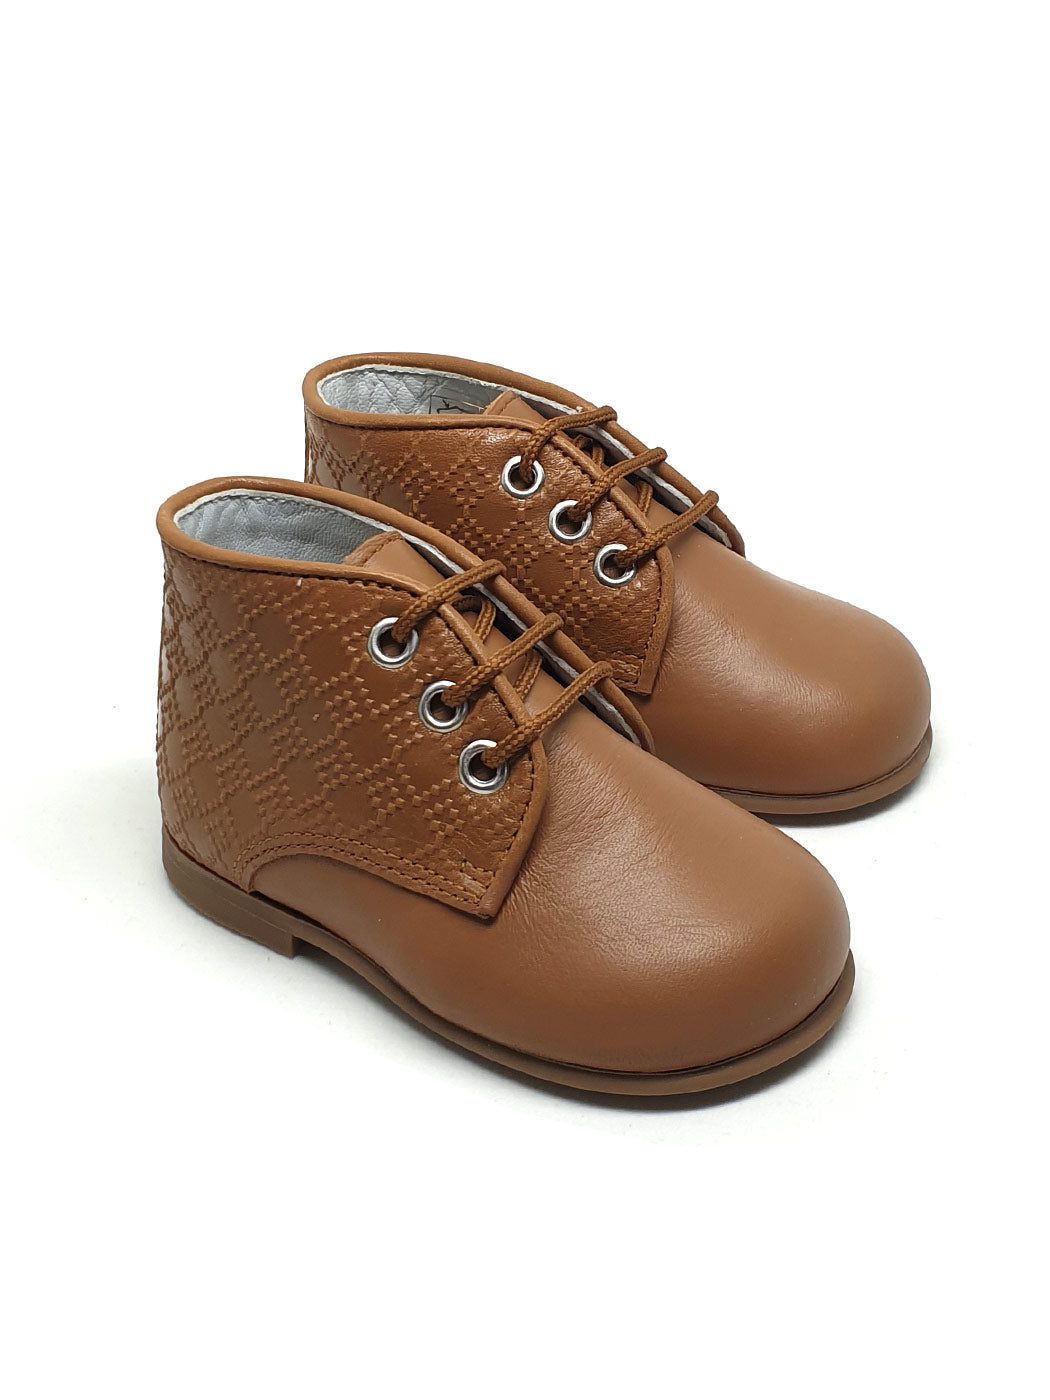 Boy's Baby leather booties